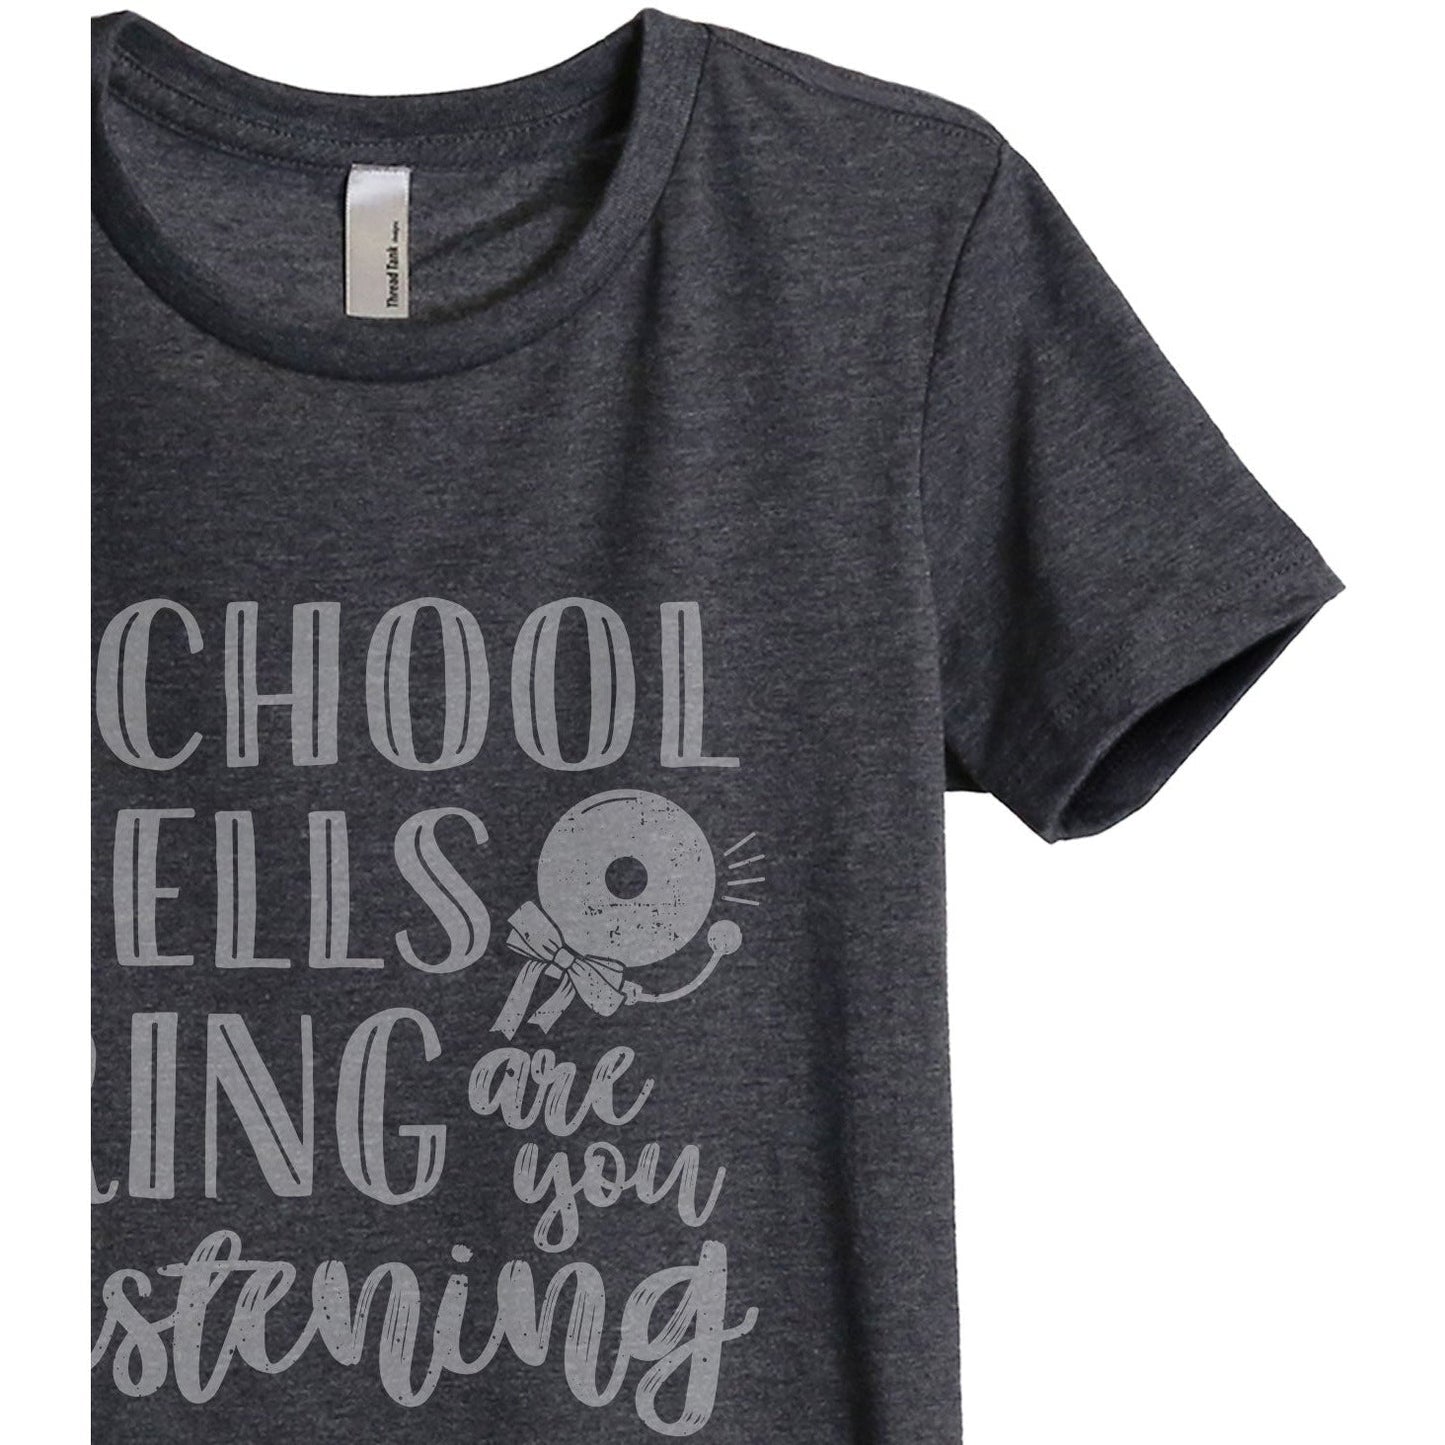 School Bell Rings Are You Listening - Stories You Can Wear